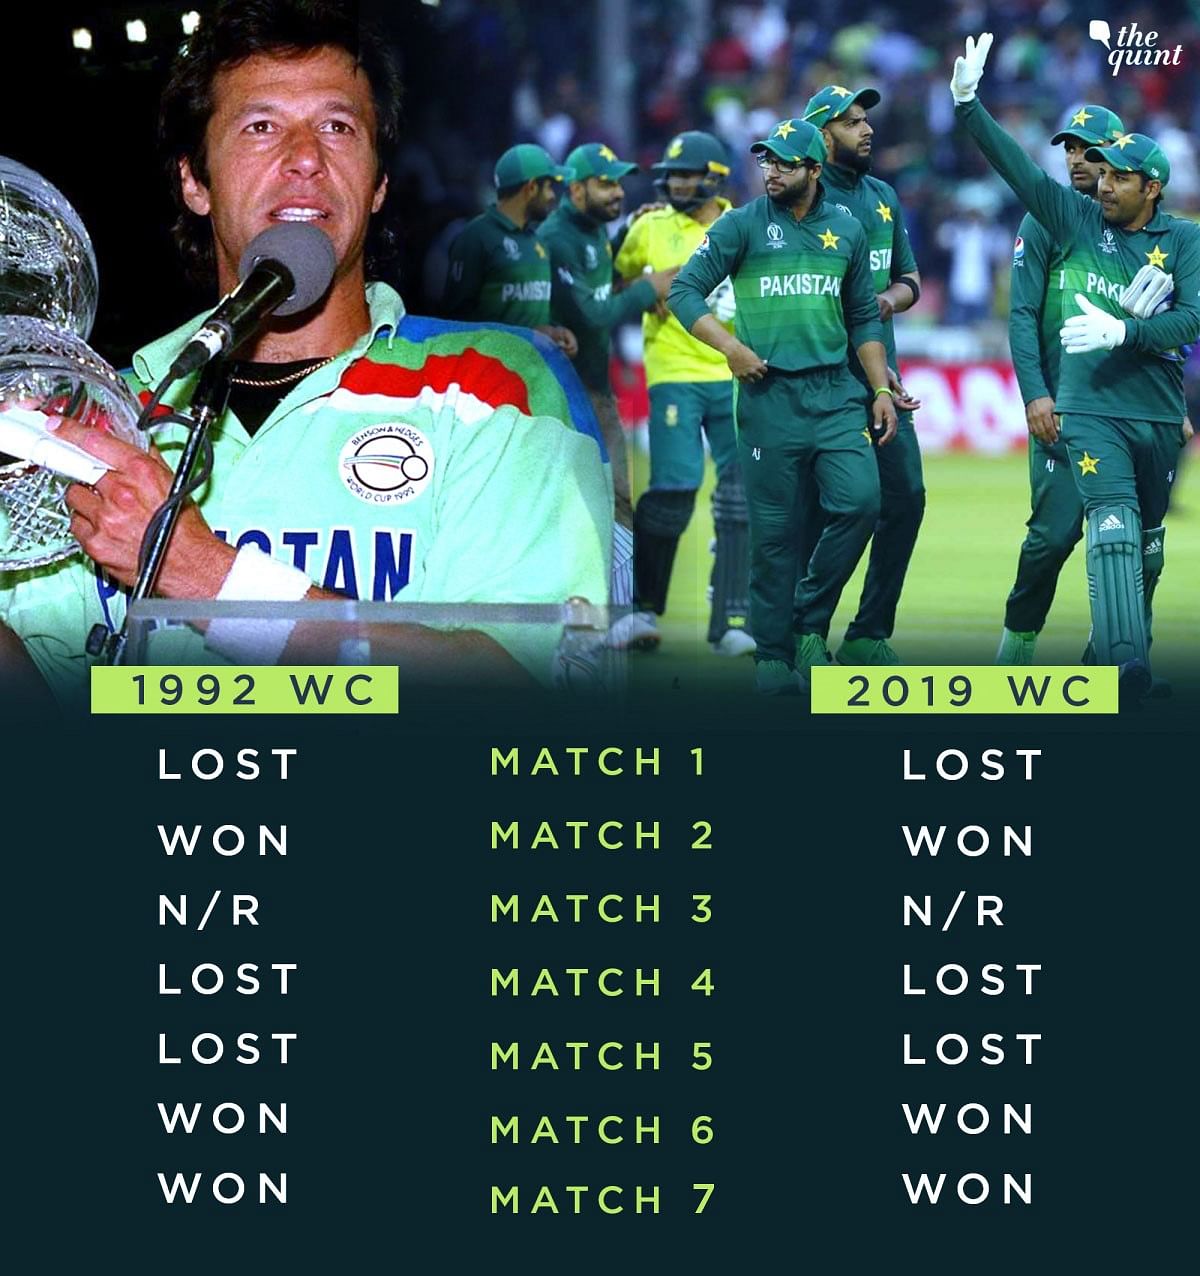 Pakistan’s journey at the ongoing ICC World Cup journey has uncanny similarities to the one in 1992, which they won.